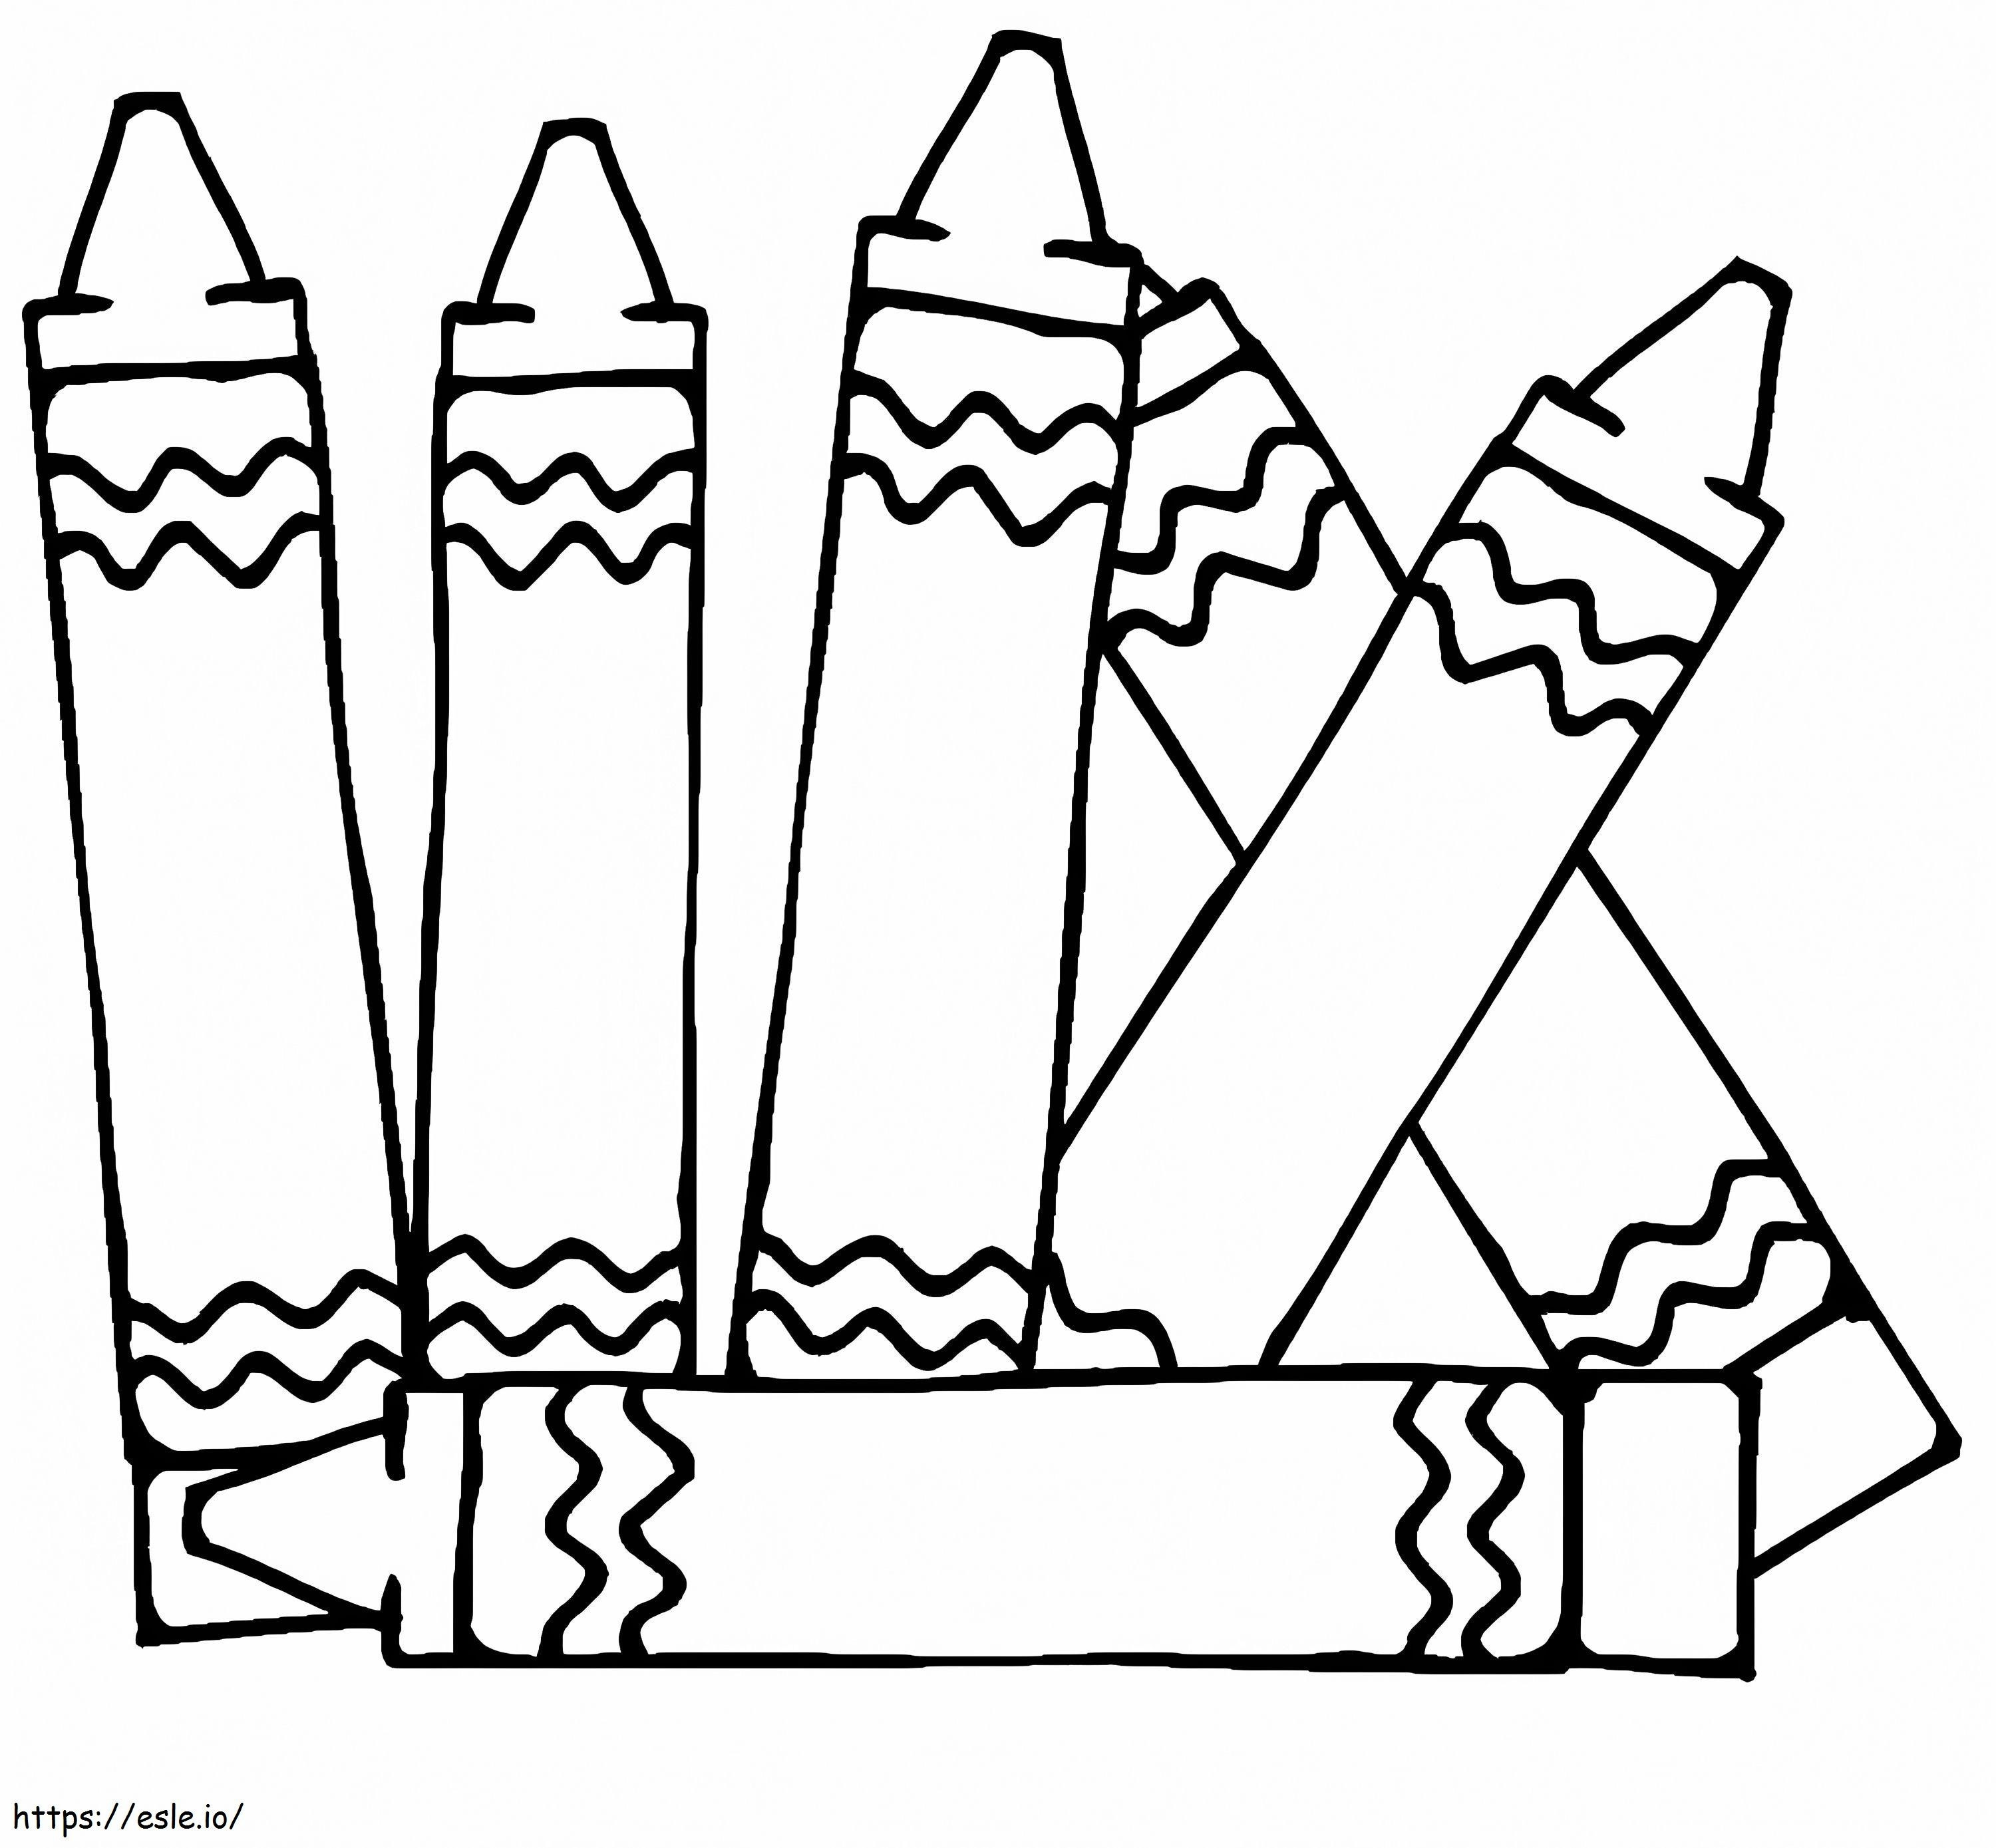 Free Crayons coloring page